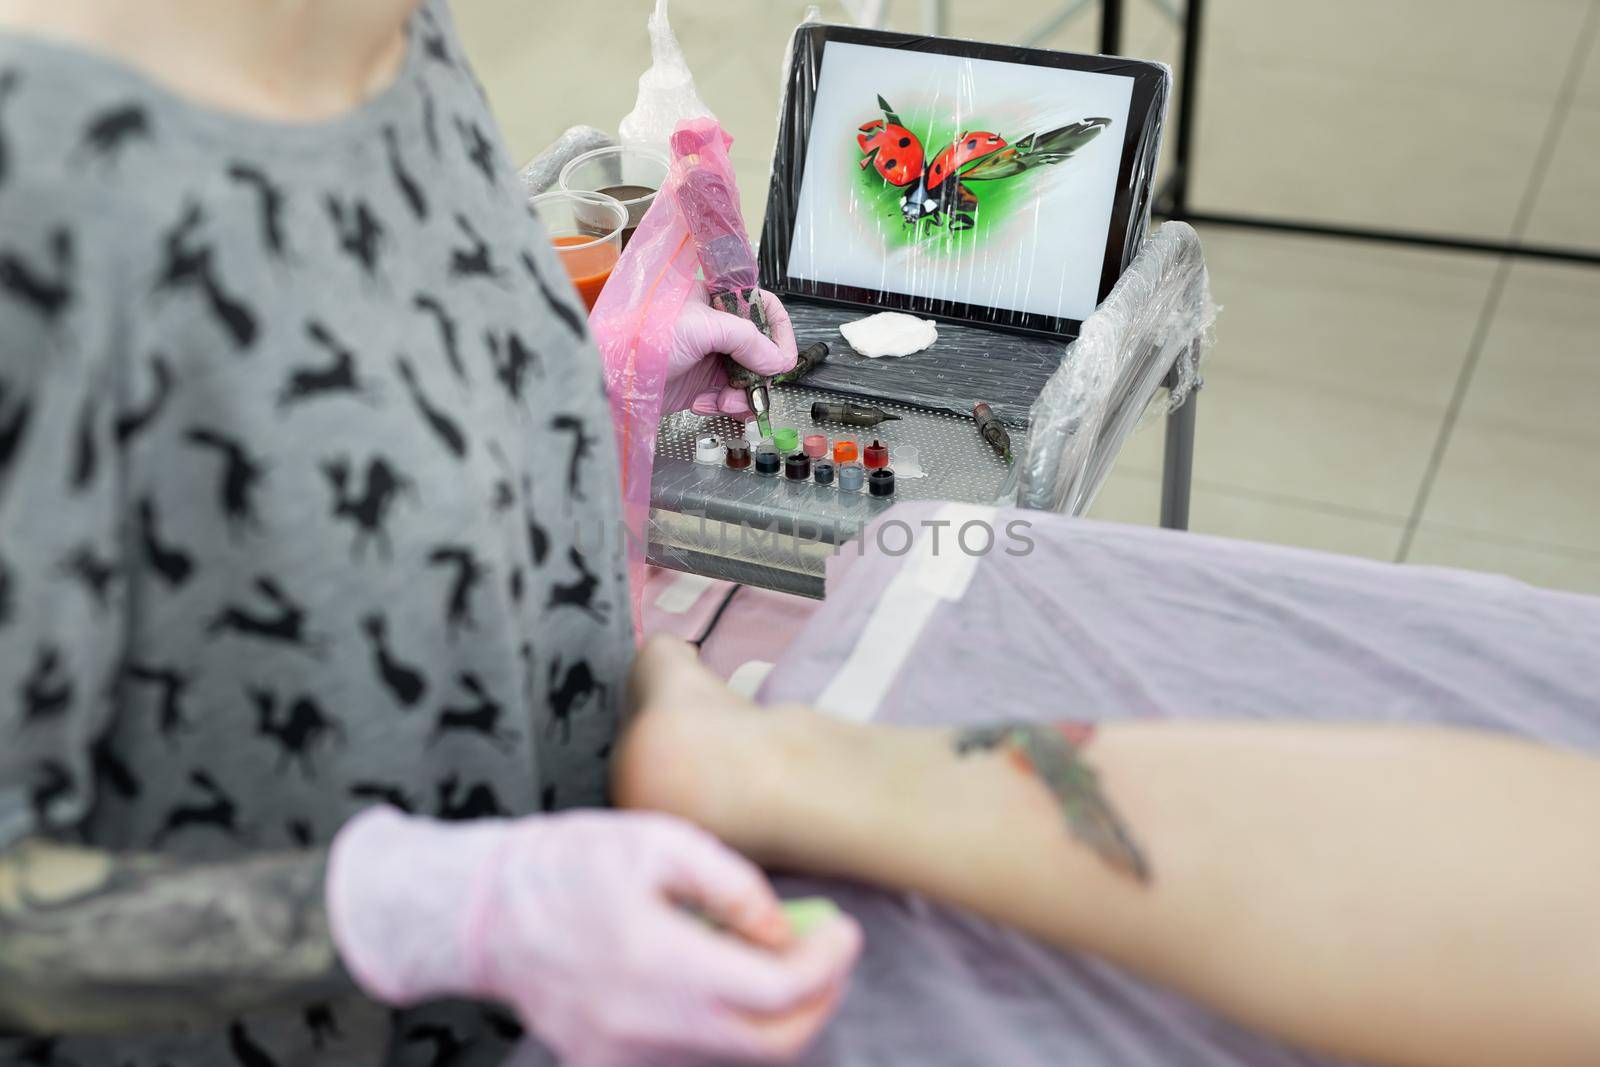 Tattoo master dips a tattoo machine with needles in black ink. The tattoo master applies a colored tattoo on the skin of a young girl, in the background is a tablet with a picture of a ladybug. by StudioPeace